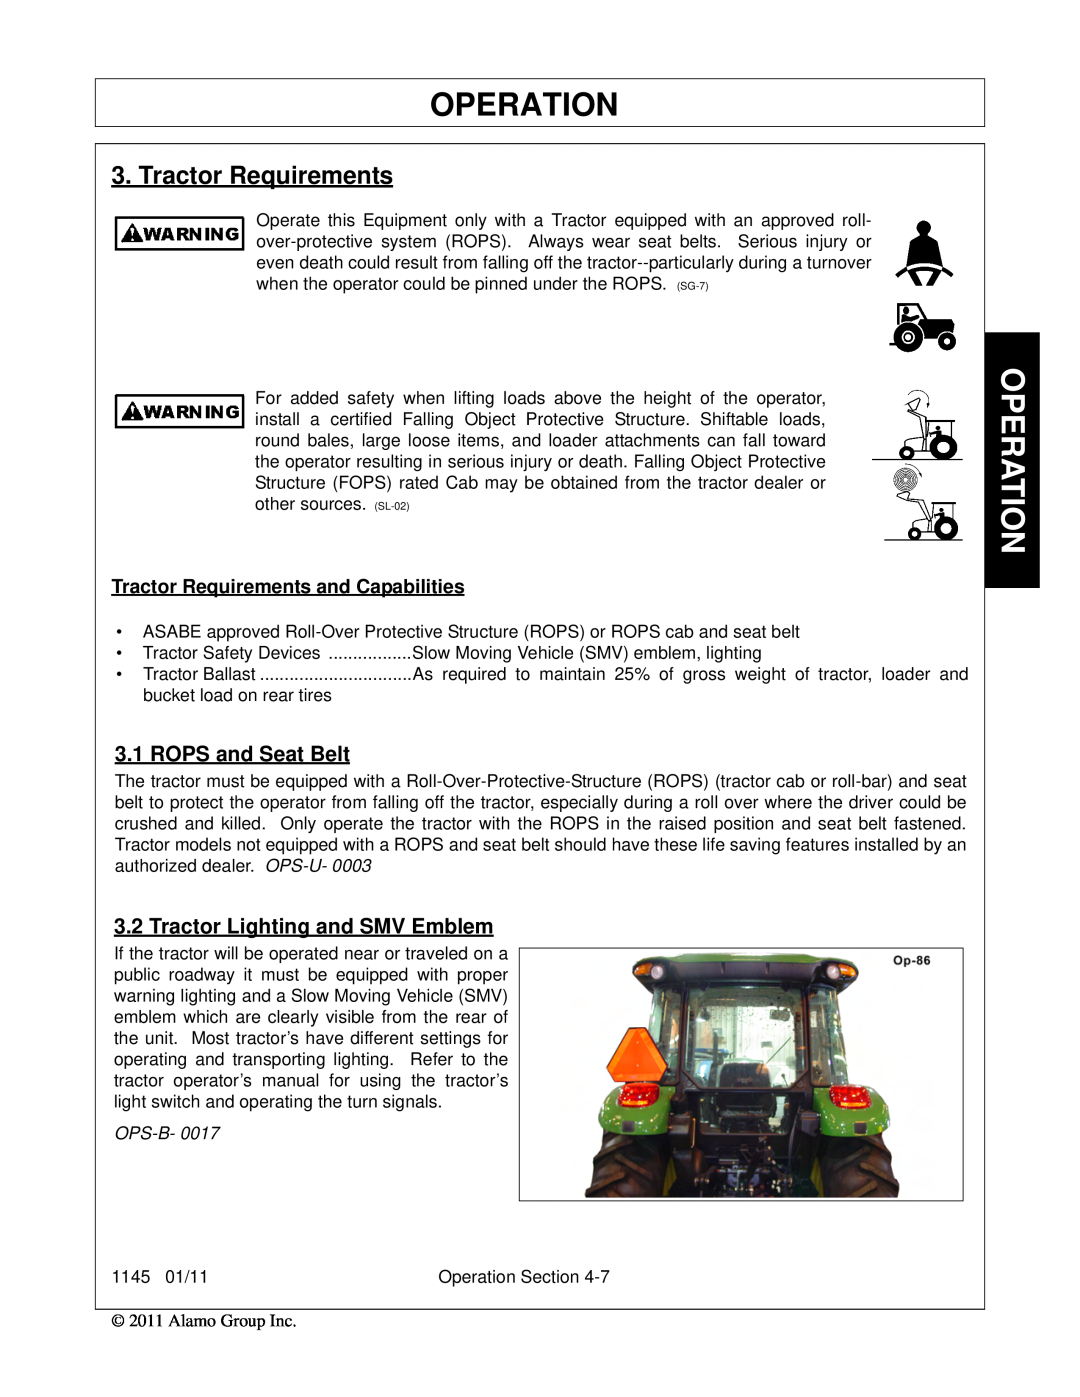 Bush Hog 1145 manual Operation, Tractor Requirements, ROPS and Seat Belt, Tractor Lighting and SMV Emblem, Ops-B 